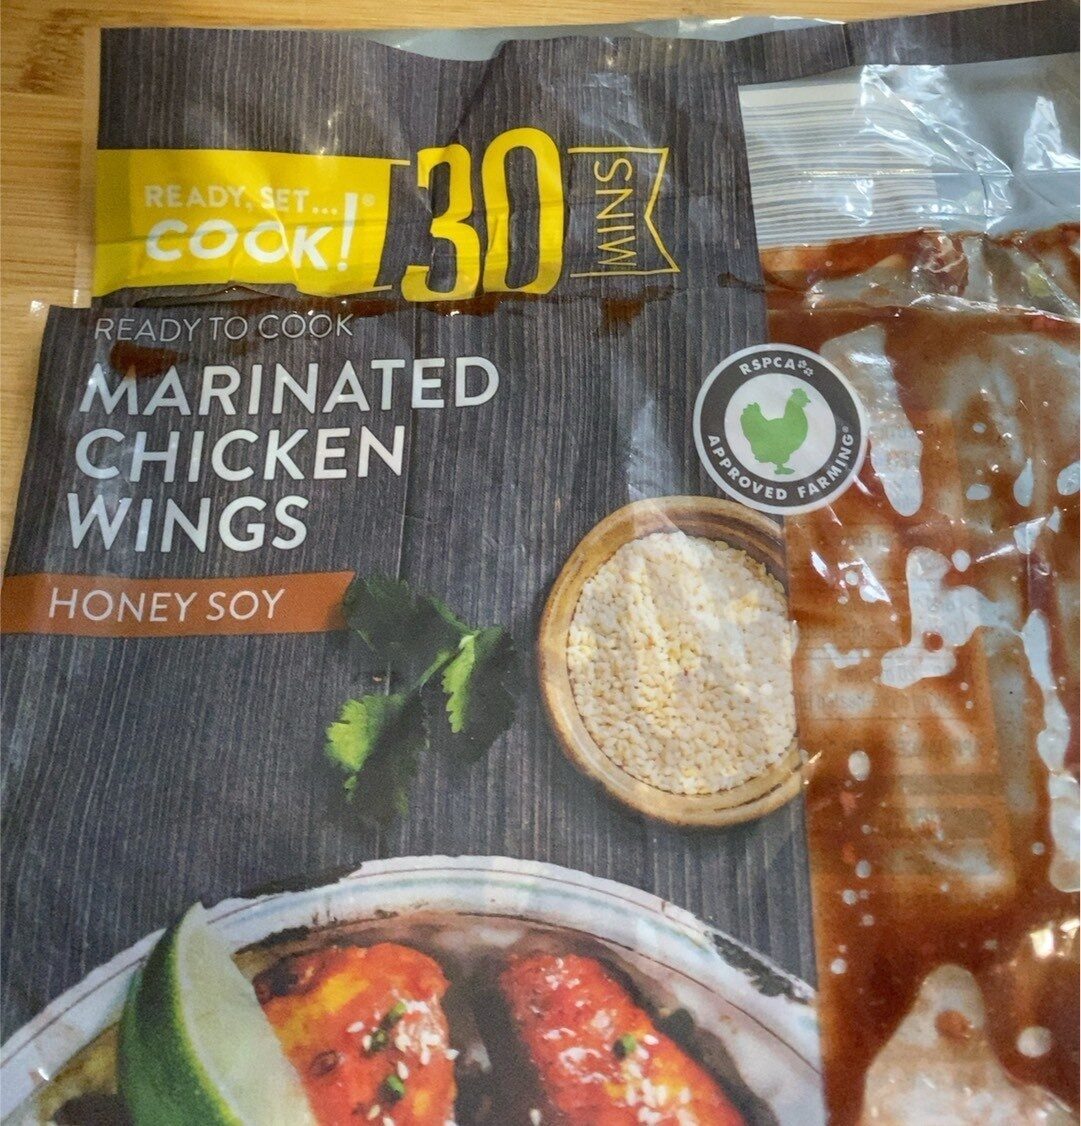 Marinated Chicken Wings - Product